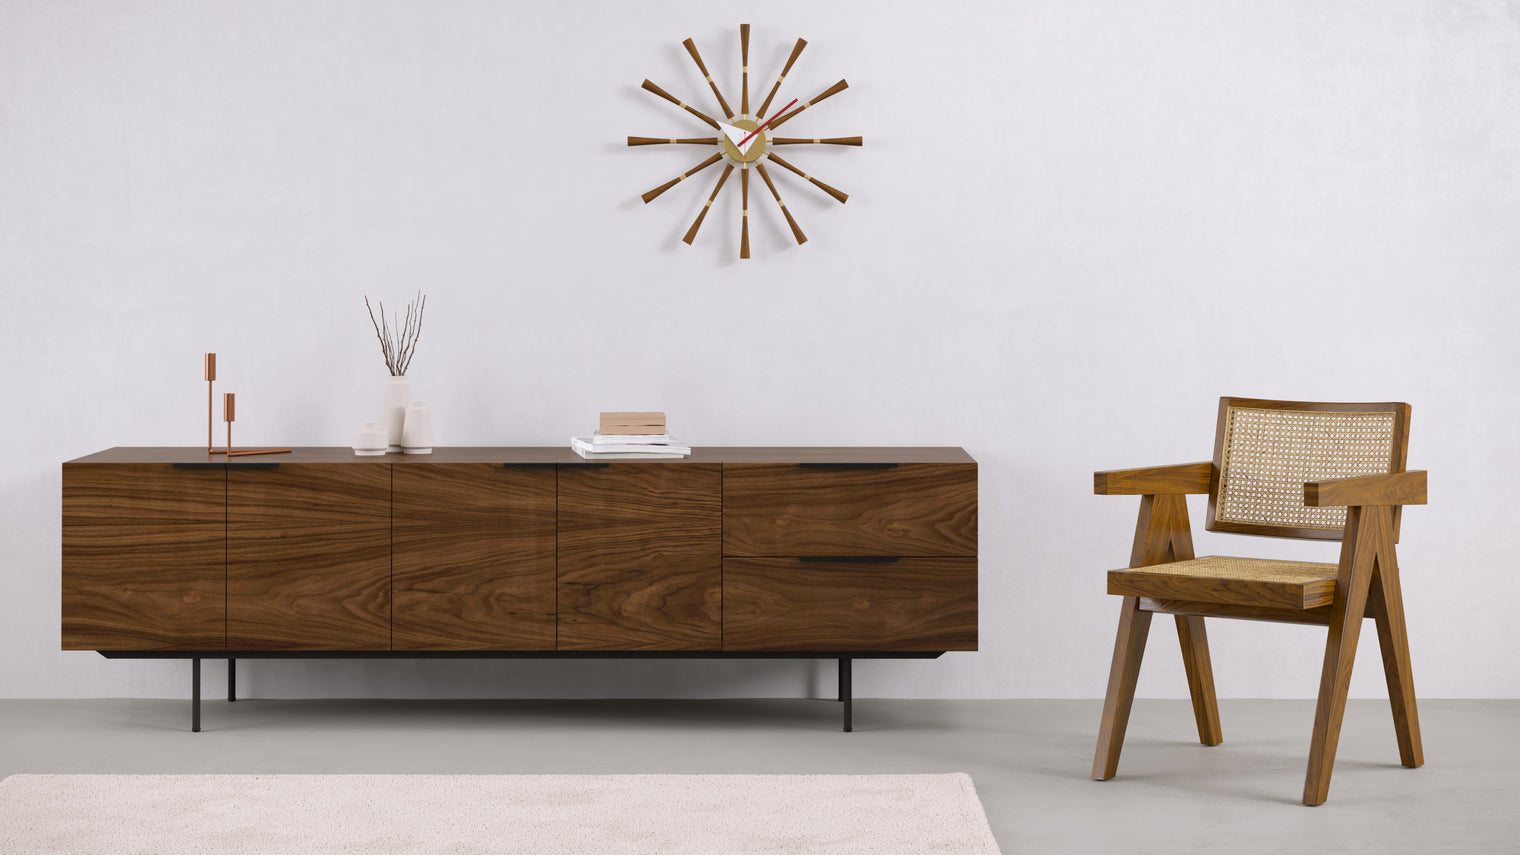 Ahead of its Time | Flaunting a striking appearance that balances minimalist and mid-century modern styles, the Spindle Clock is sure to catch eyes and turn heads no matter where it’s featured. Kitchens, bedrooms, and living rooms are all great options for this wall clock.
